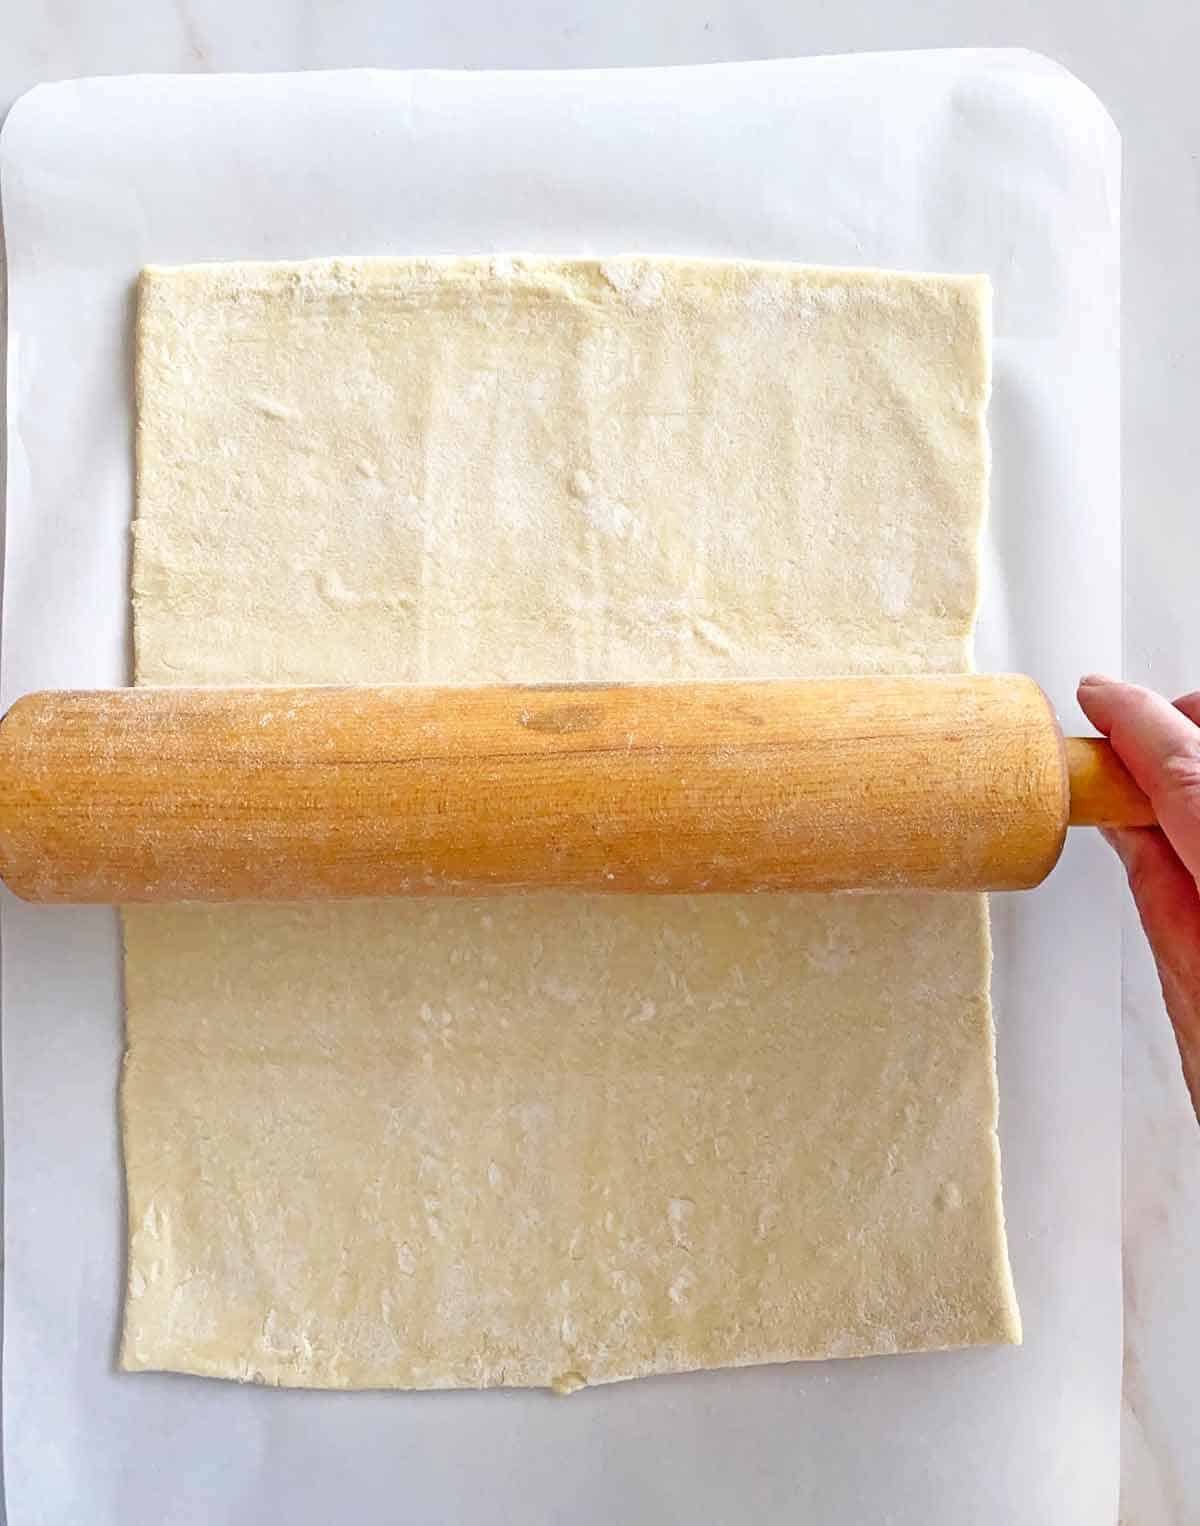 Using a rolling pin to roll out puff pastry.